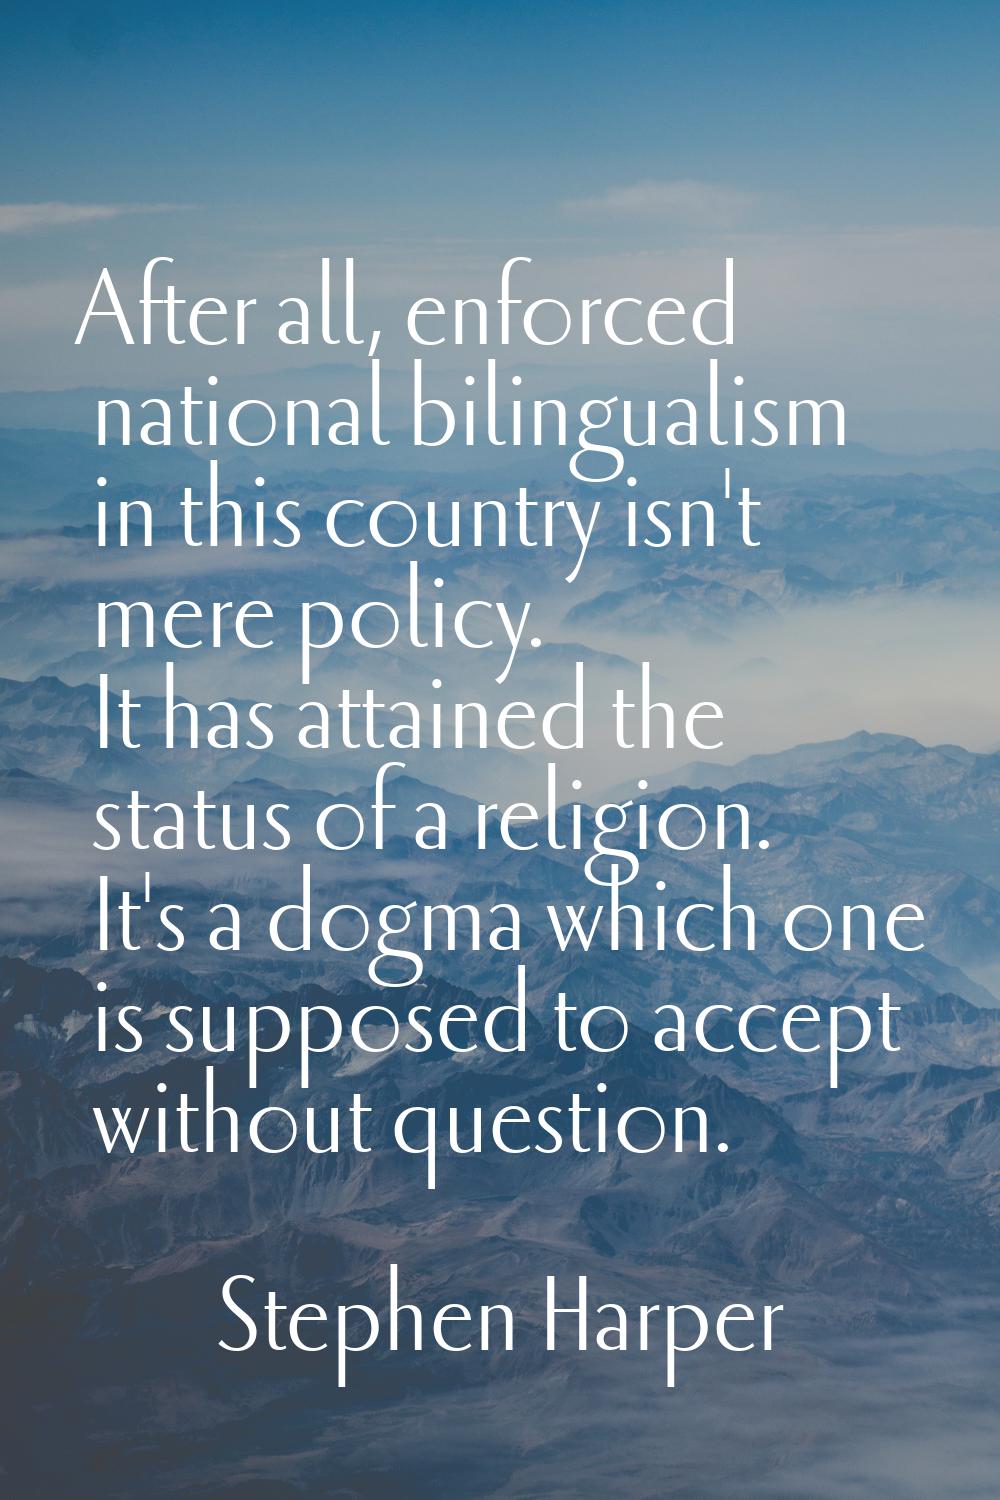 After all, enforced national bilingualism in this country isn't mere policy. It has attained the st